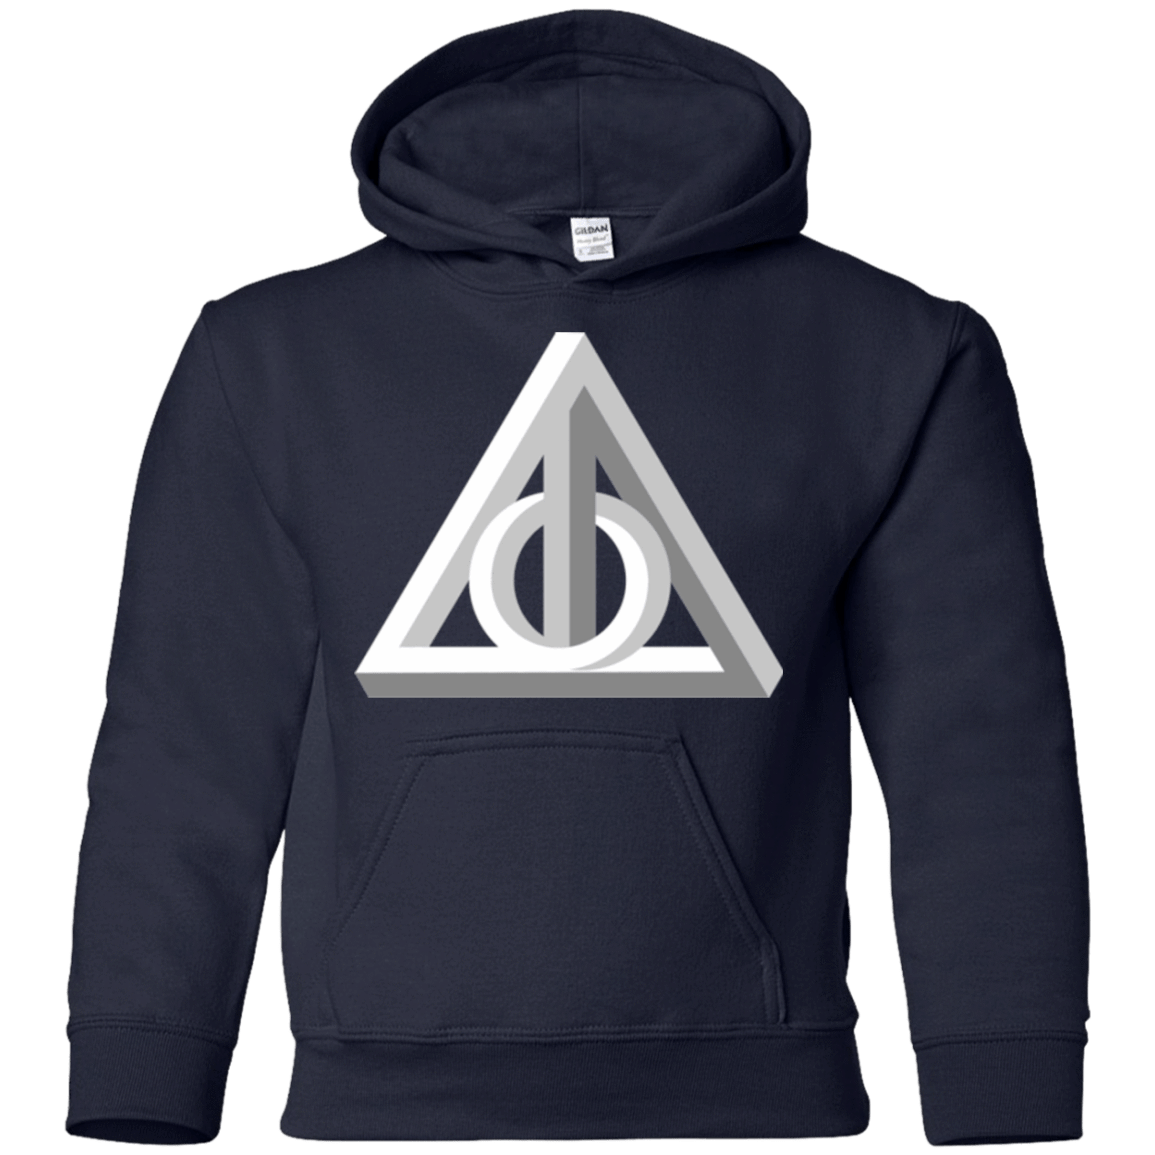 Sweatshirts Navy / YS Deathly Impossible Hallows Youth Hoodie